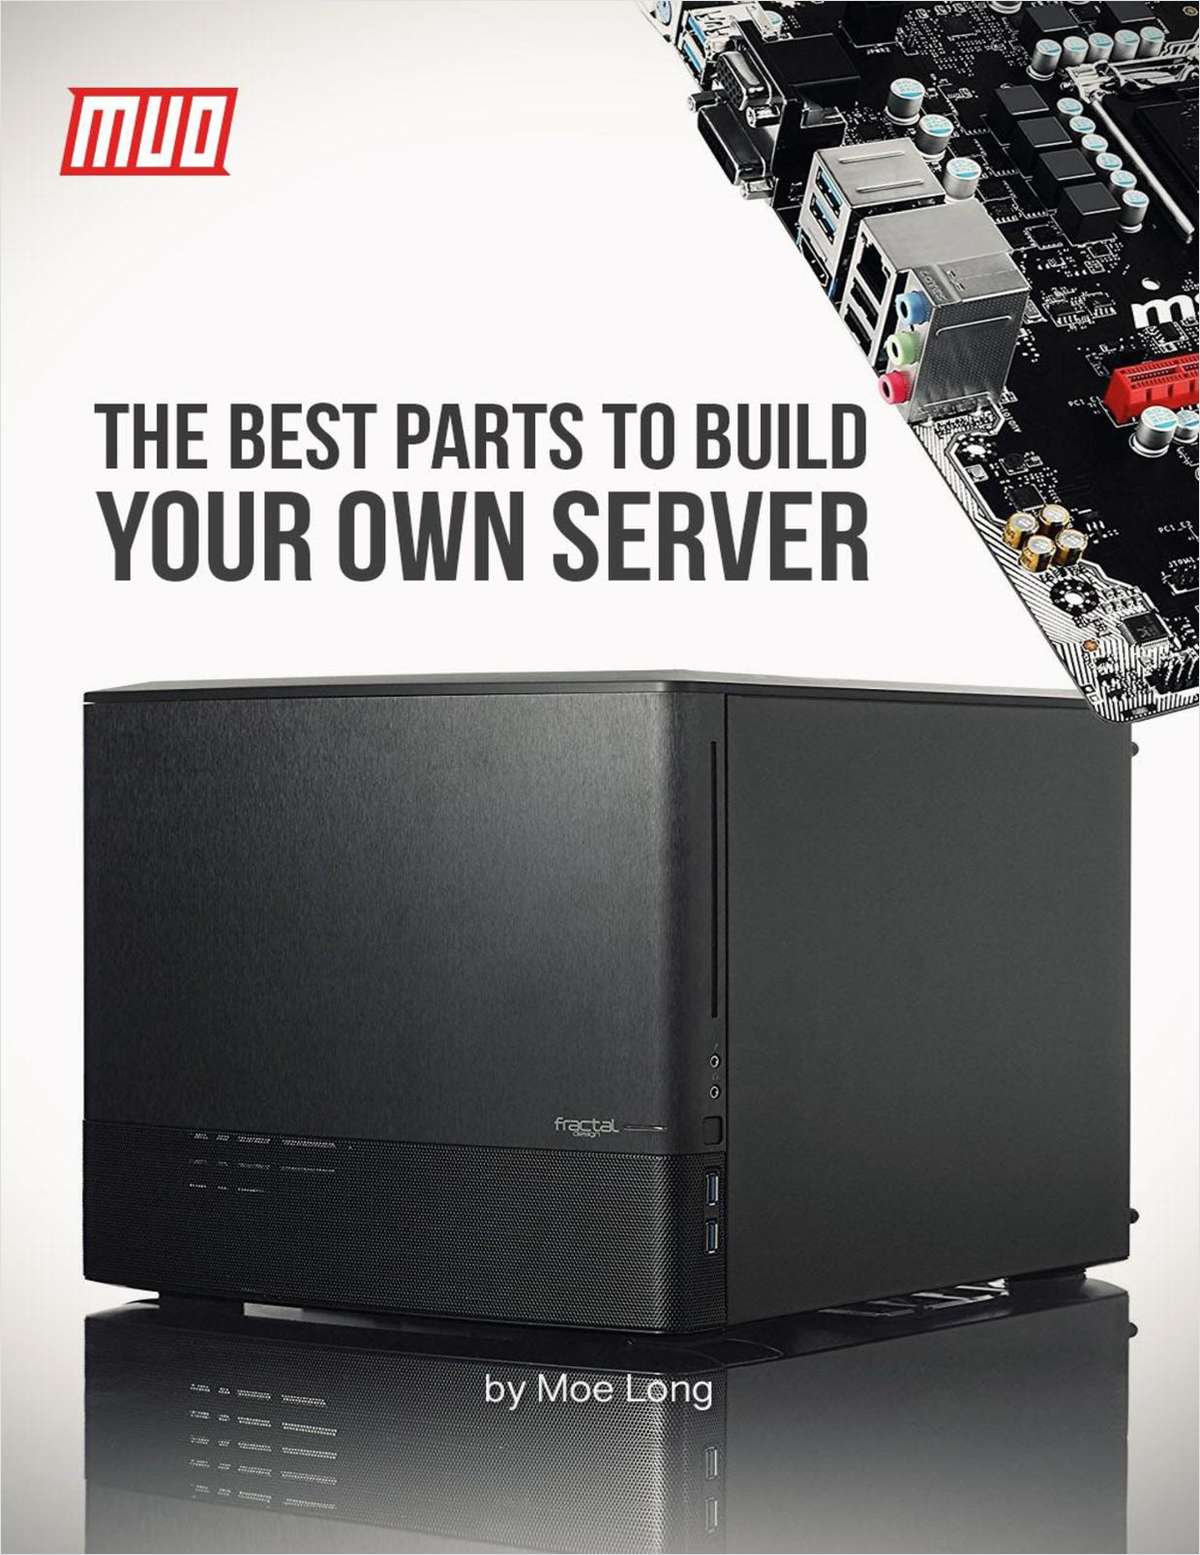 The Best Parts to Build Your Own Server